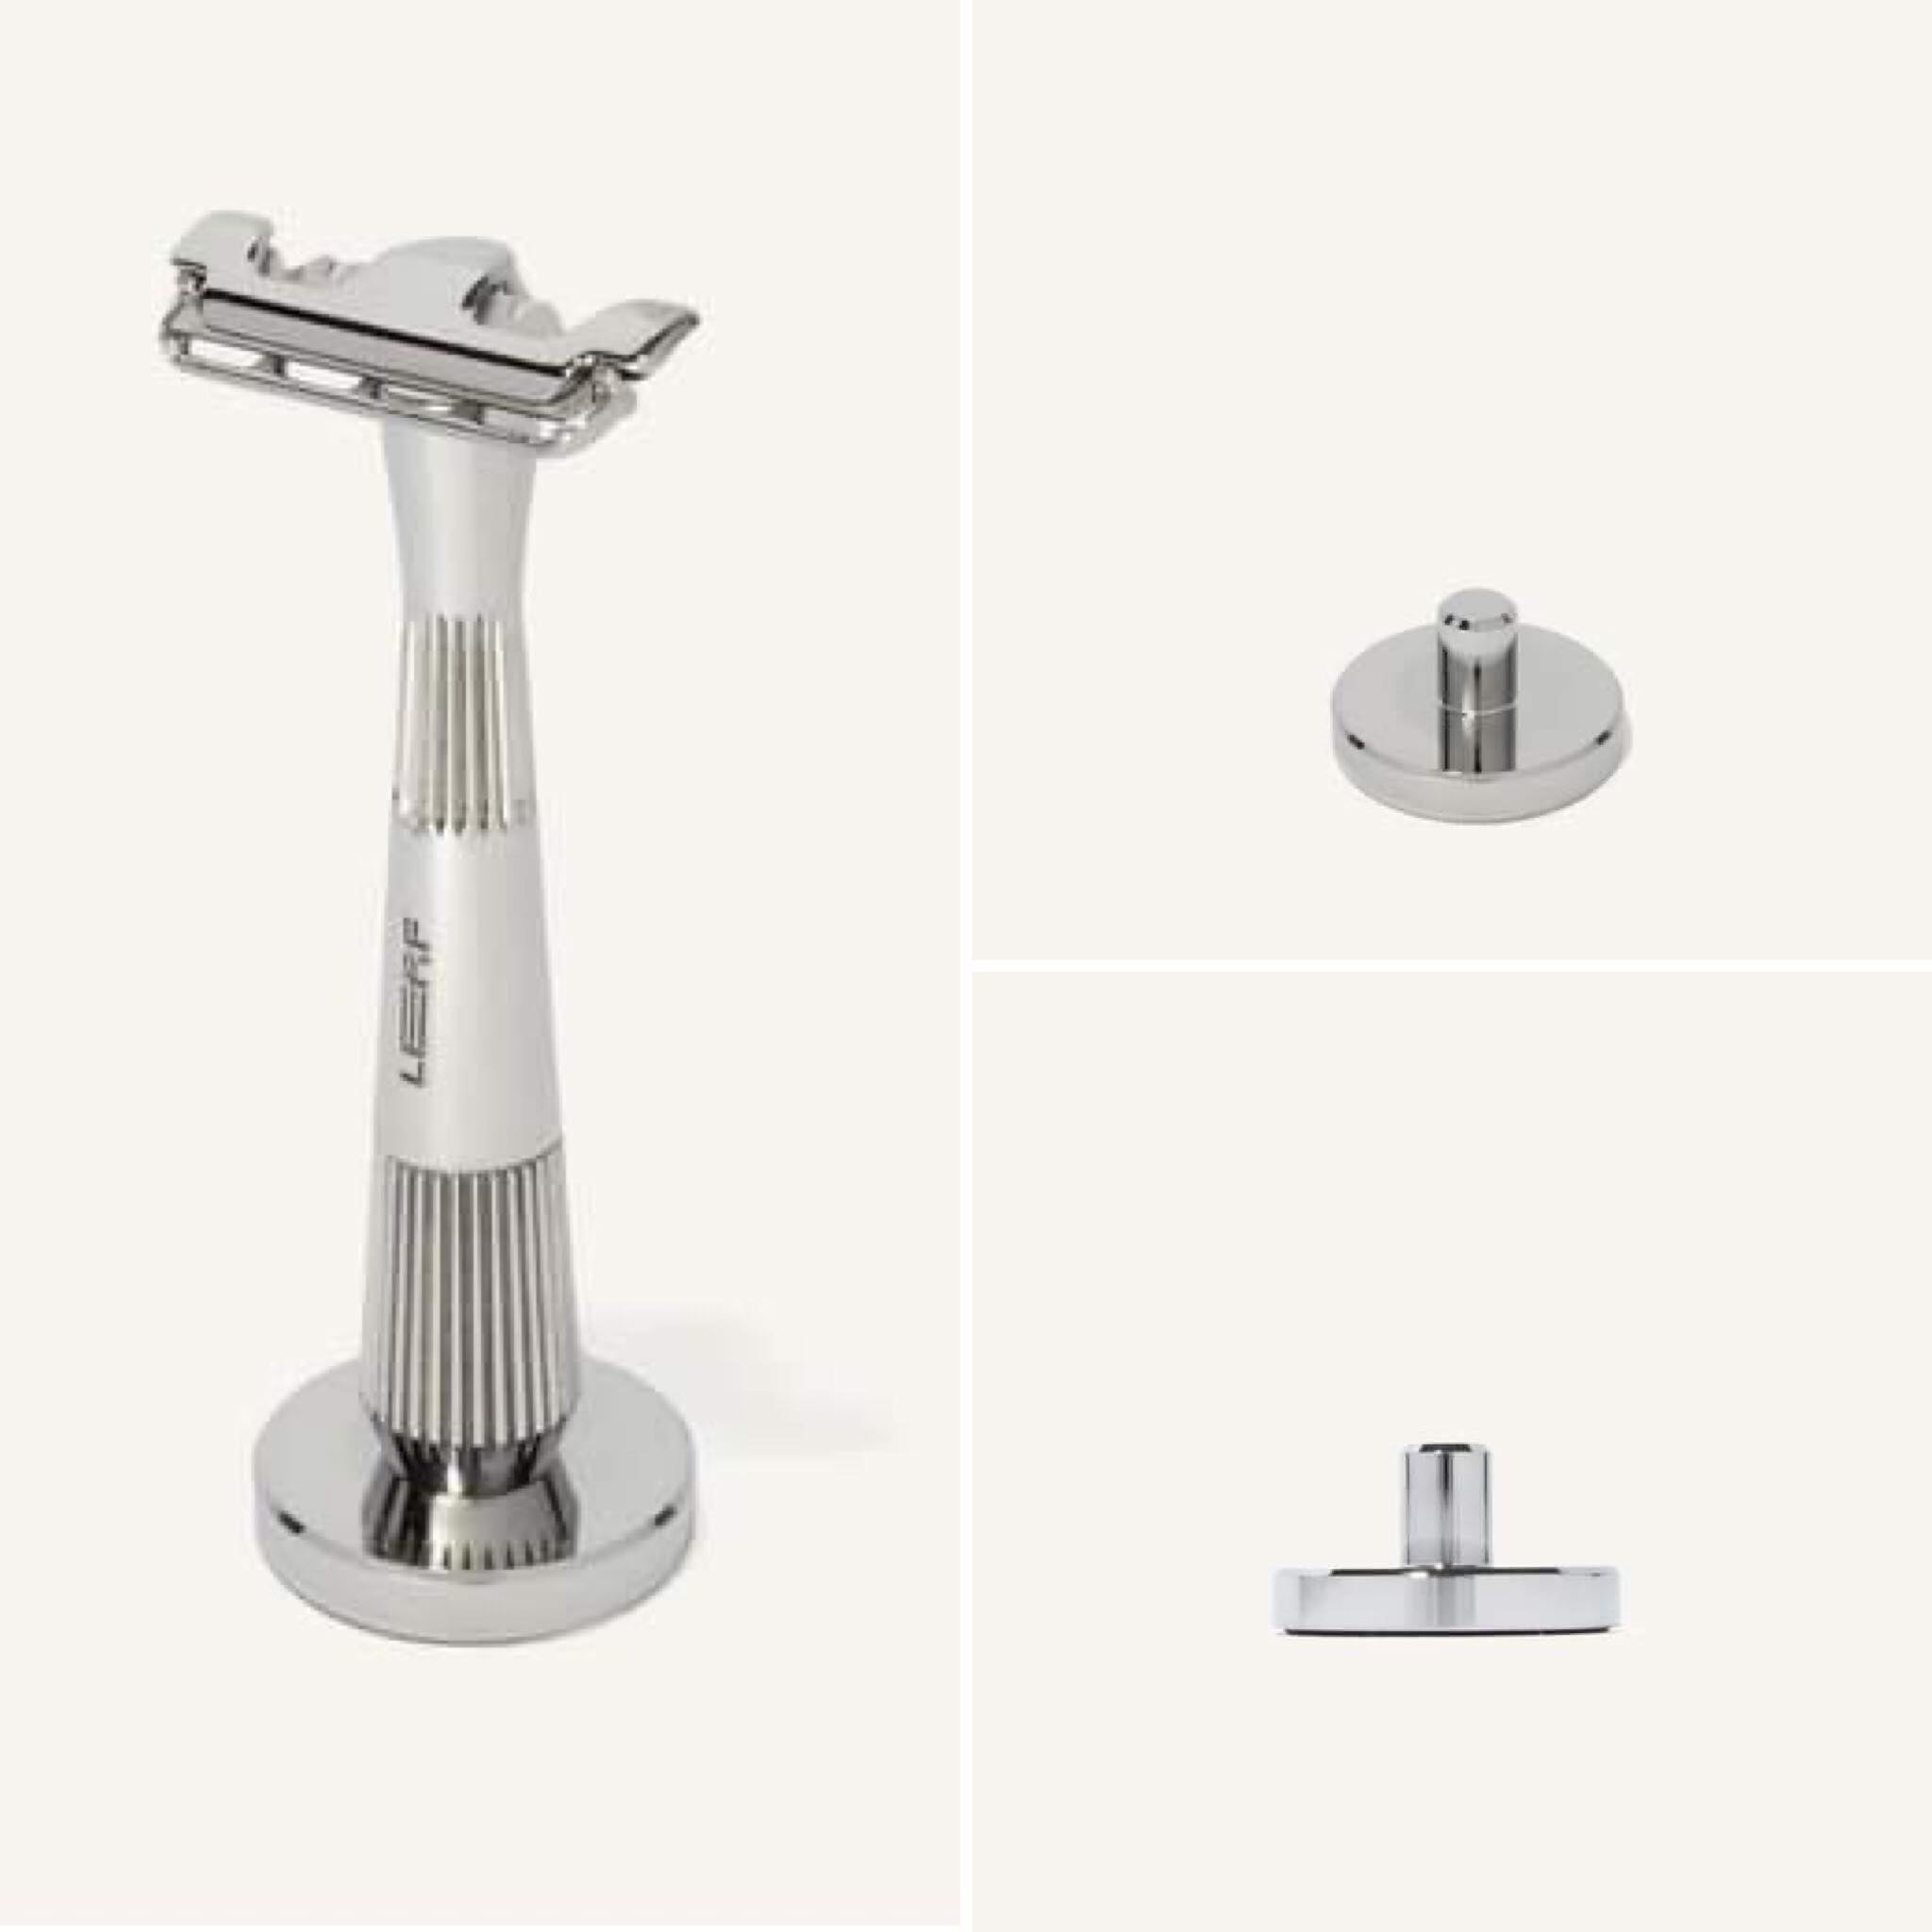 Display your chrome twig or thorn razor proudly in this convenient stand designed with helpful features like an embedded rubber foot so that it stays in place.